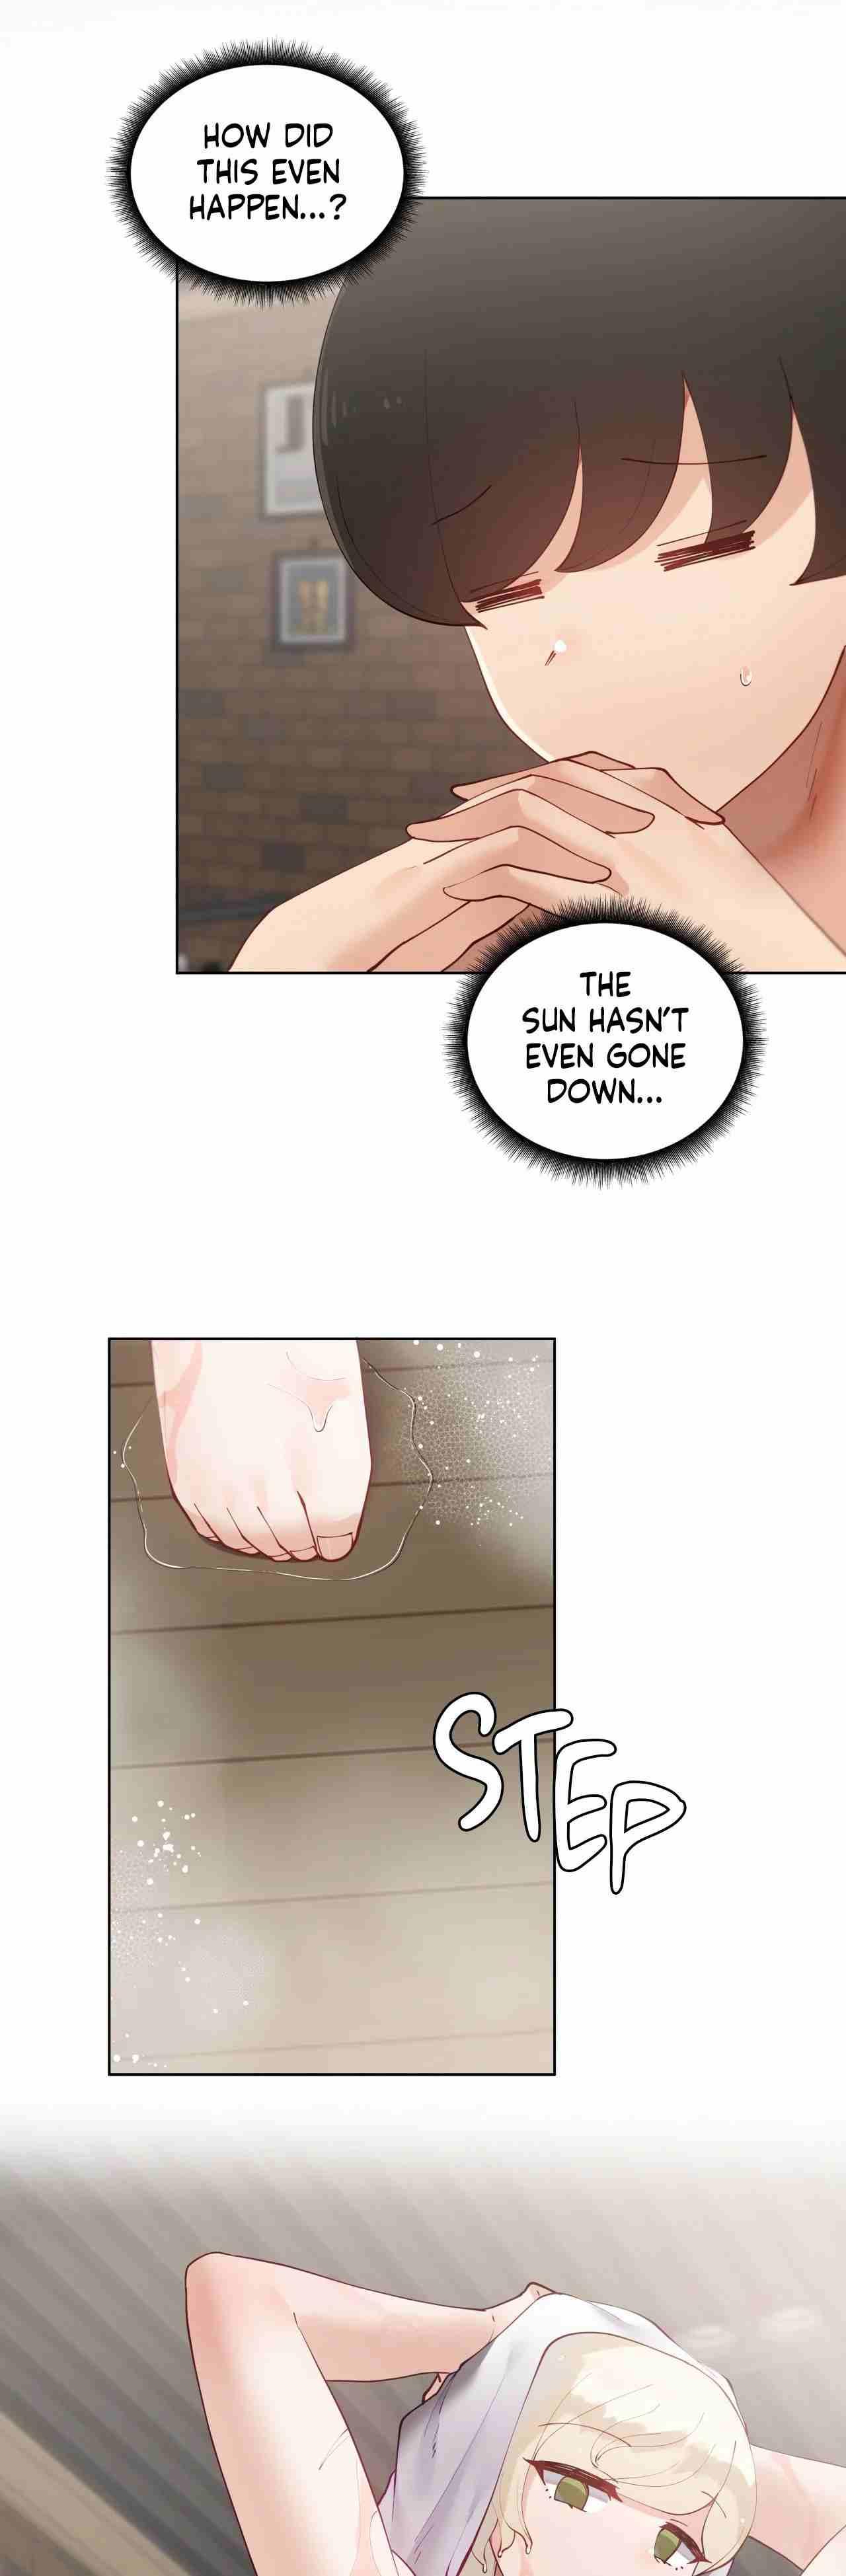 Casado [Over.J, Choi Tae-young] Learning the Hard Way 2nd Season (After Story) Ch.1/? [English] [Manhwa PDF] Ongoing Deflowered - Page 3